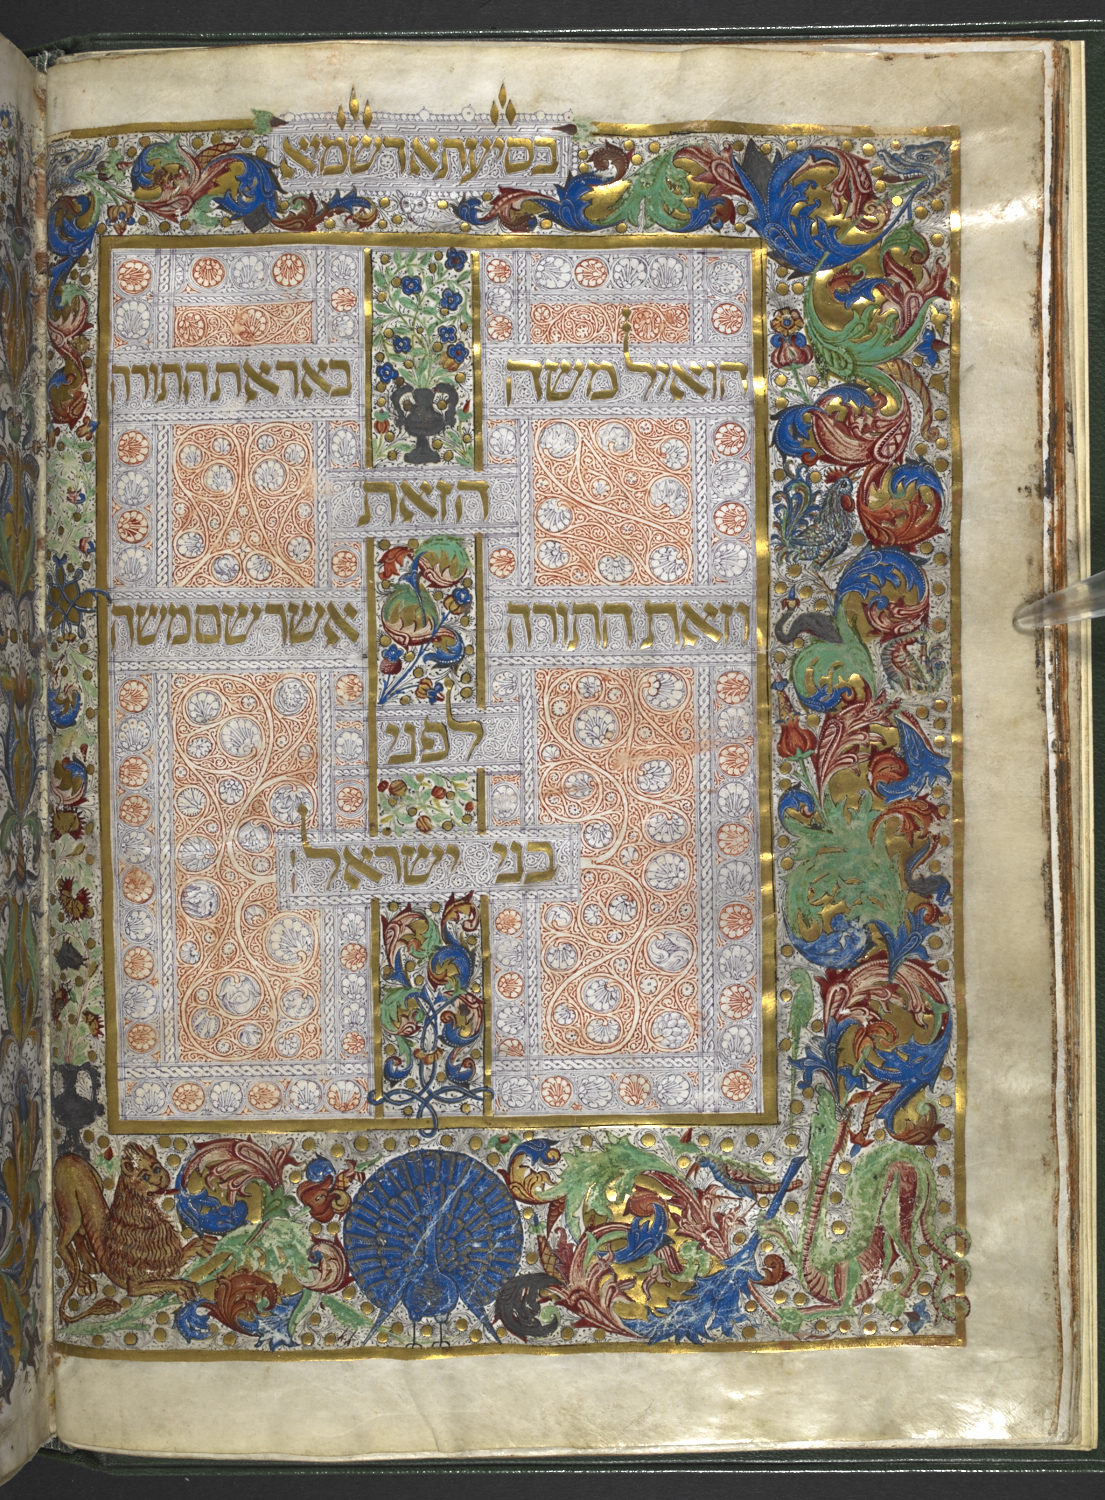 Excerpts from Maimonides' Code of Law, embellished with sumptuous full-border illuminations. Mishneh Torah, Lisbon, 1472 CE (Harley MS 5698).